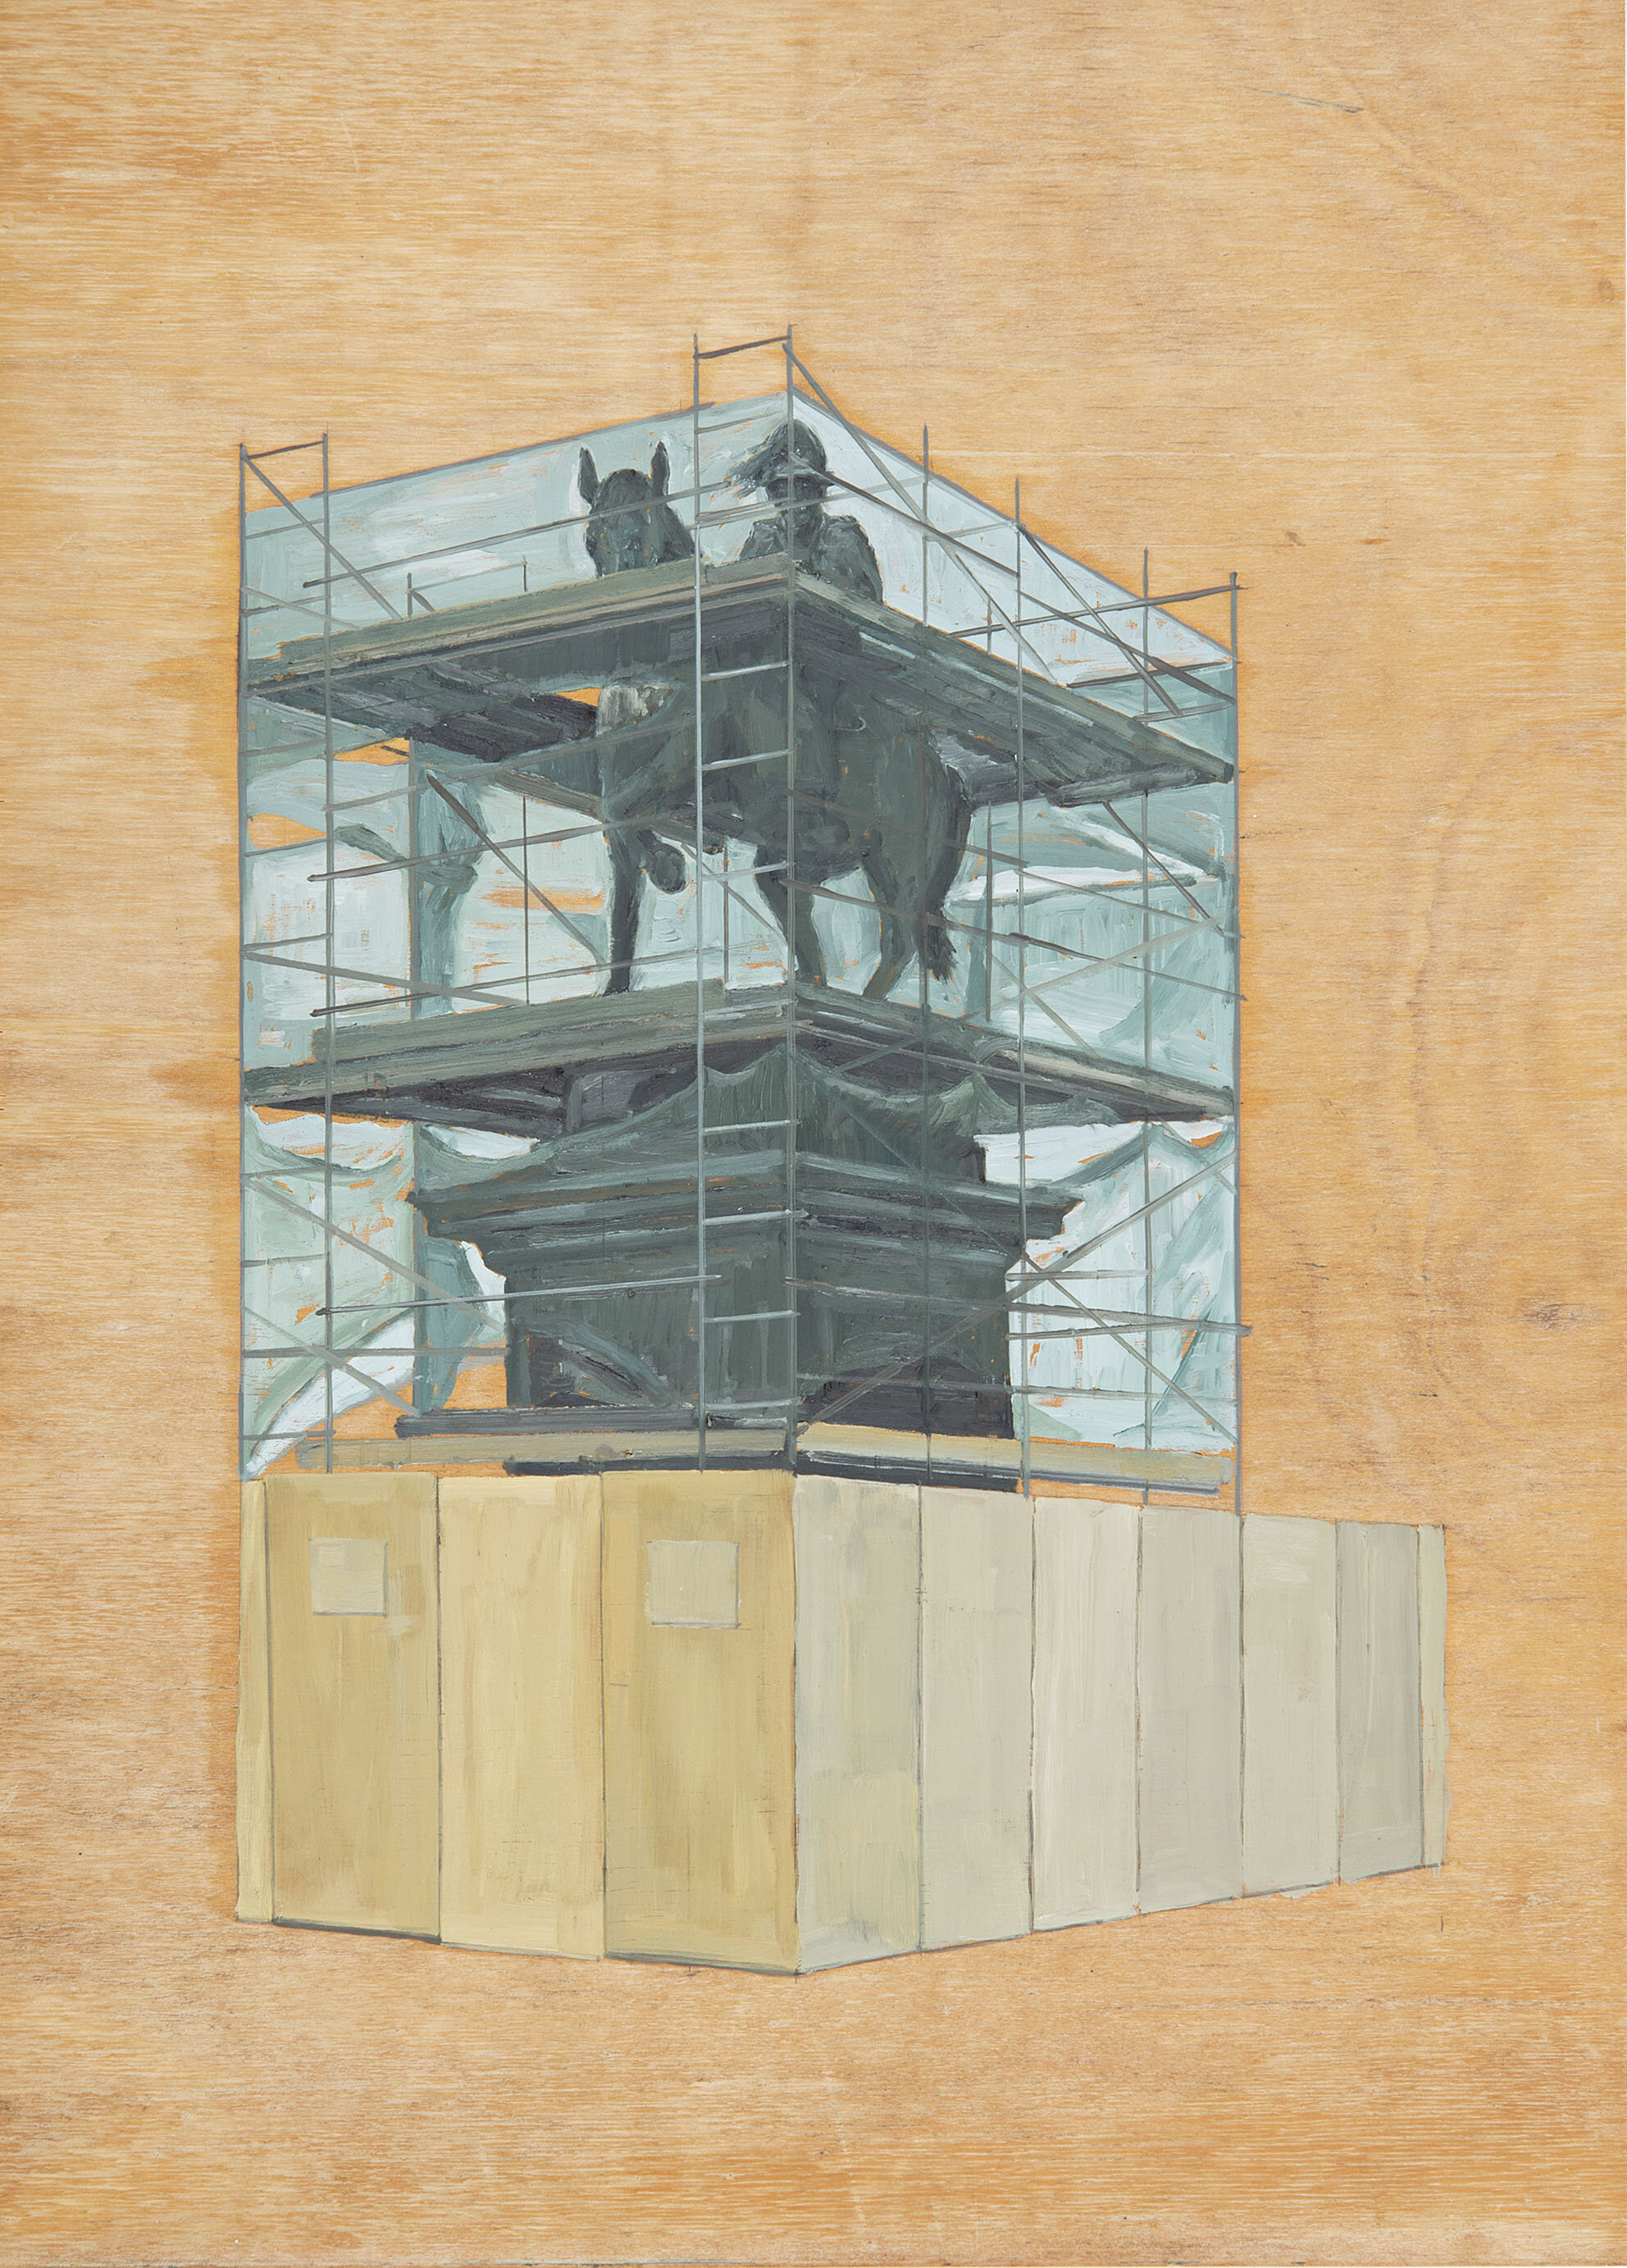 Temporary Enclosure, 2016, Oil on Plywood, 70 x 50 cm